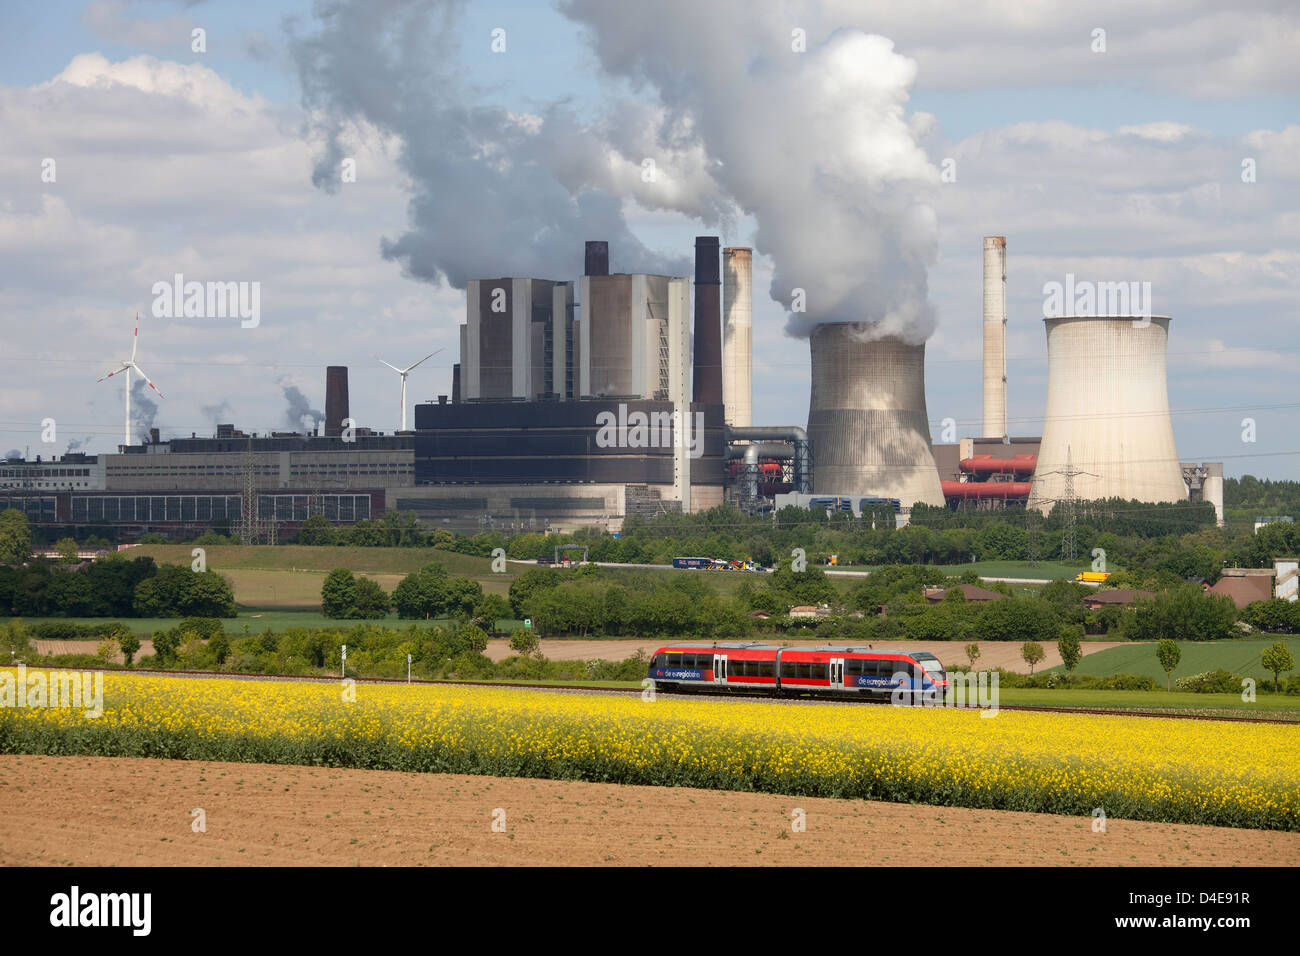 Eschweiler, Germany, the RWE lignite power plant Weisweiler Stock Photo